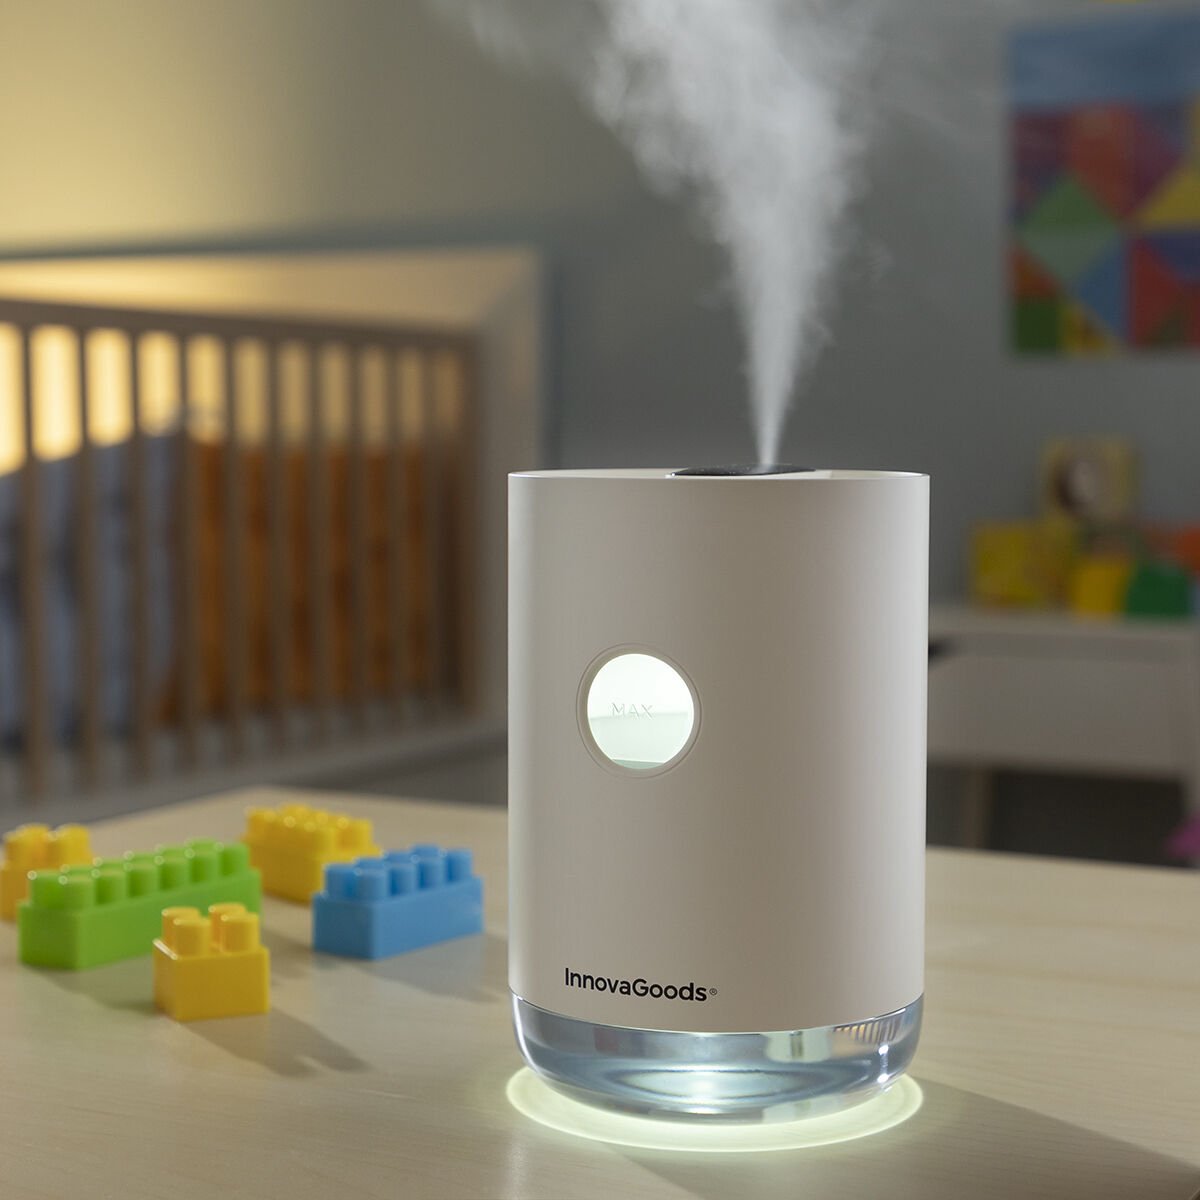 Humidificateur à ultrasons rechargeable Vaupure InnovaGoods